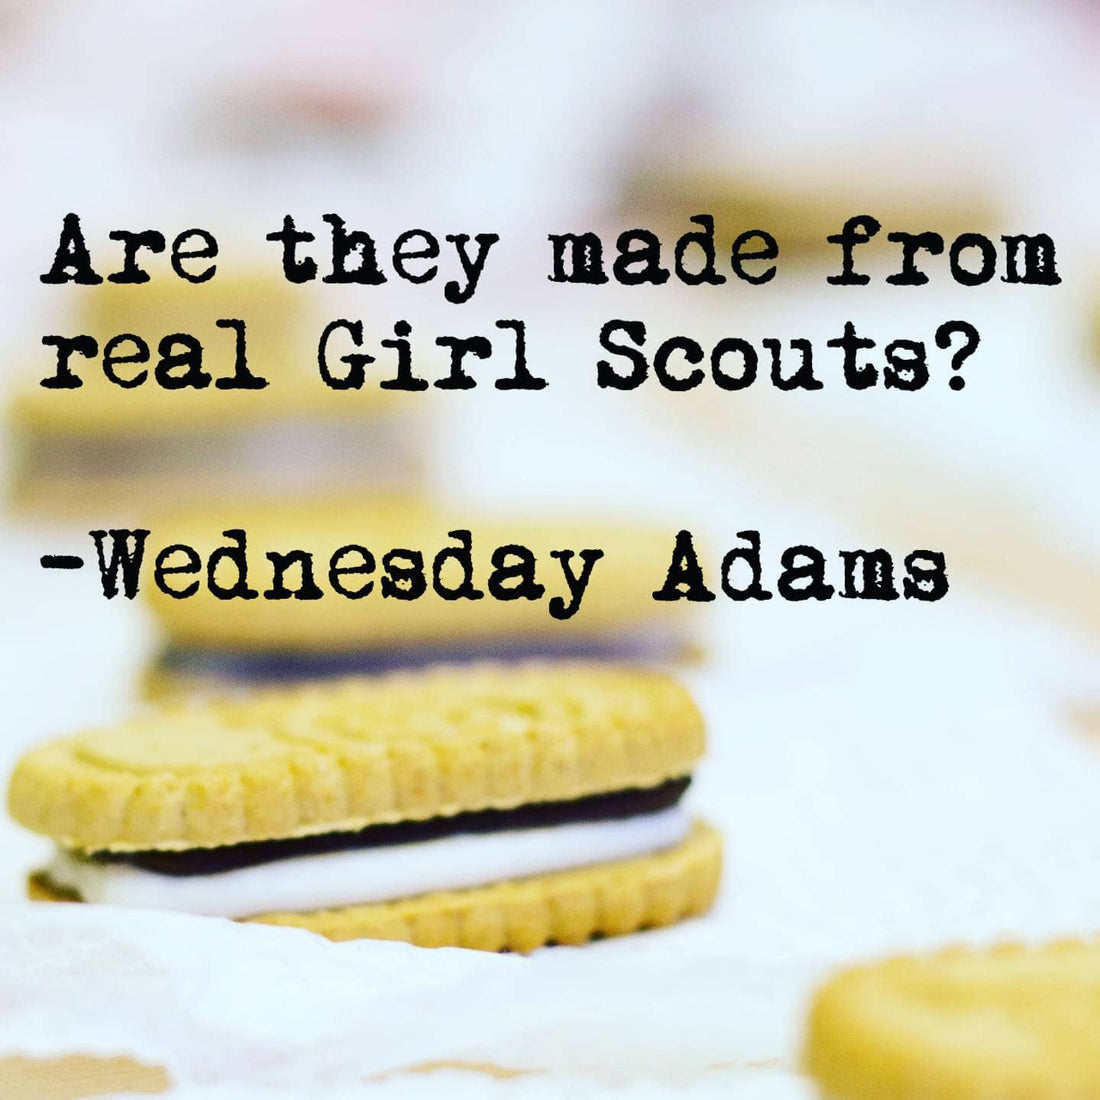 Wednesday Adams quote Are they made from real Girl Scouts?